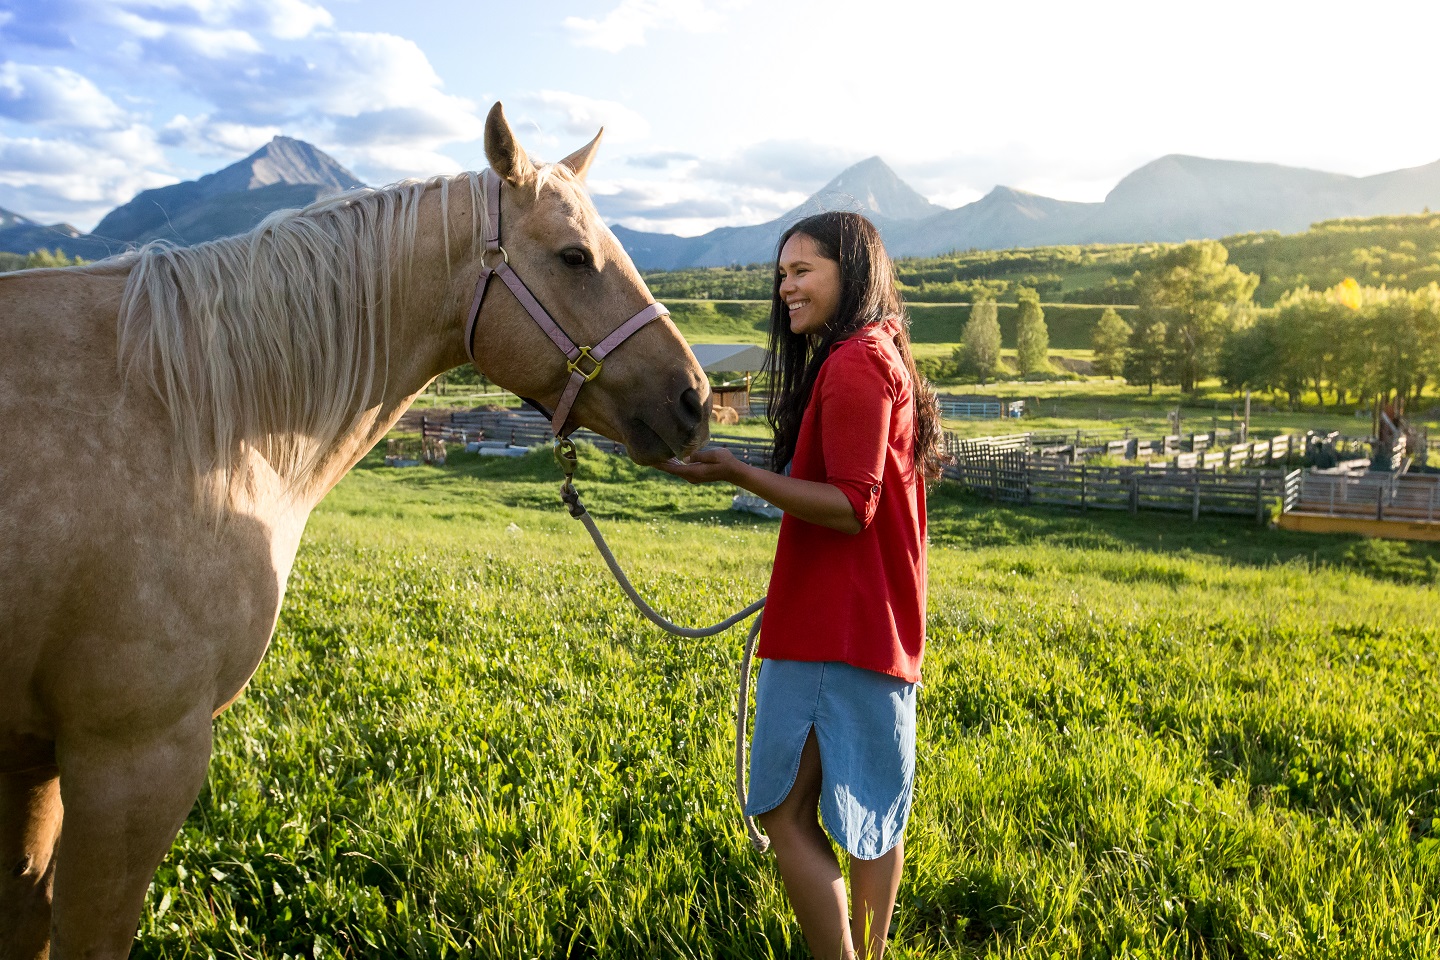 A person smiling, petting a horse in a ranch with mountains in the background.